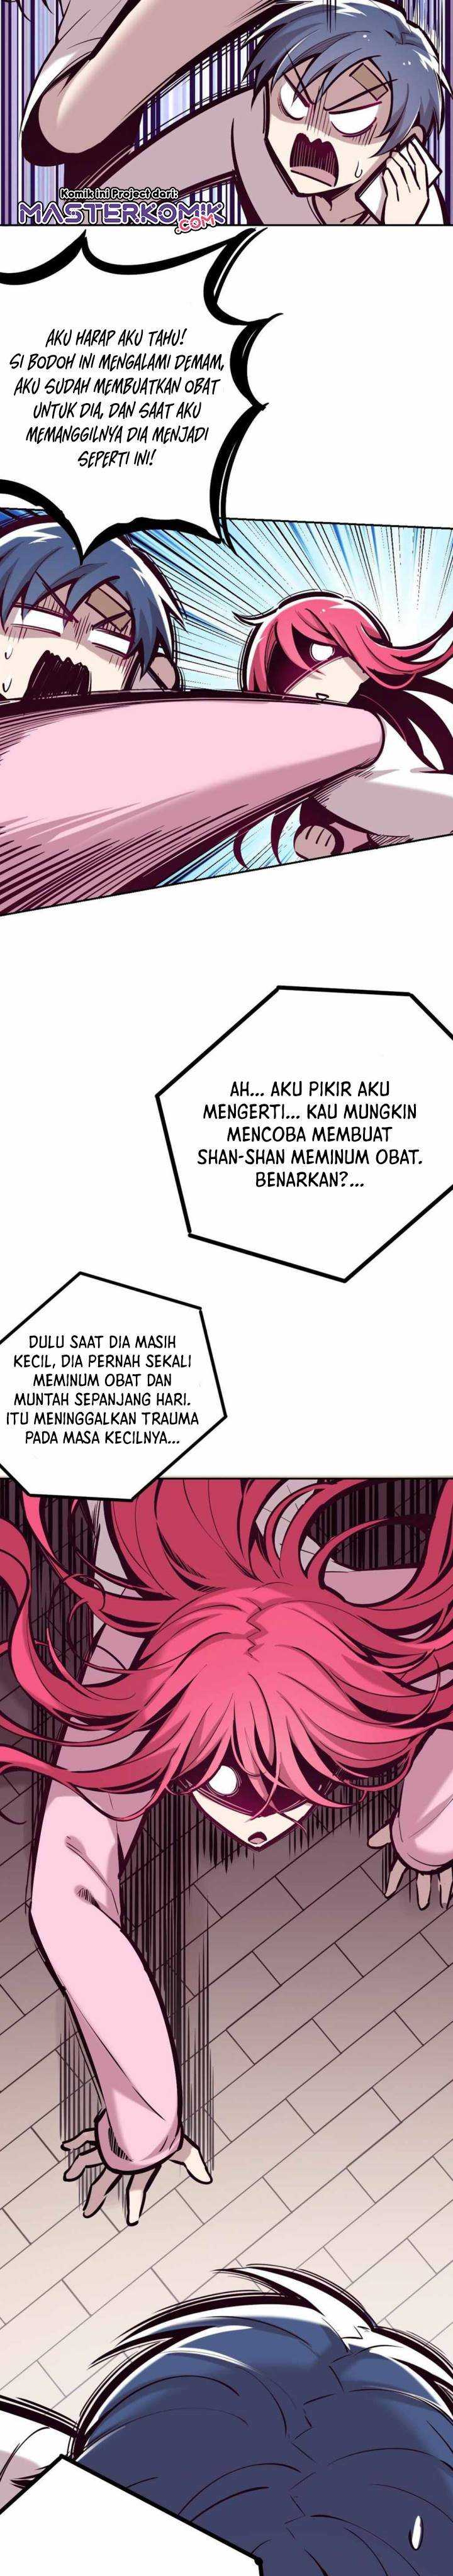 Demon X Angel, Can’t Get Along! Chapter 27